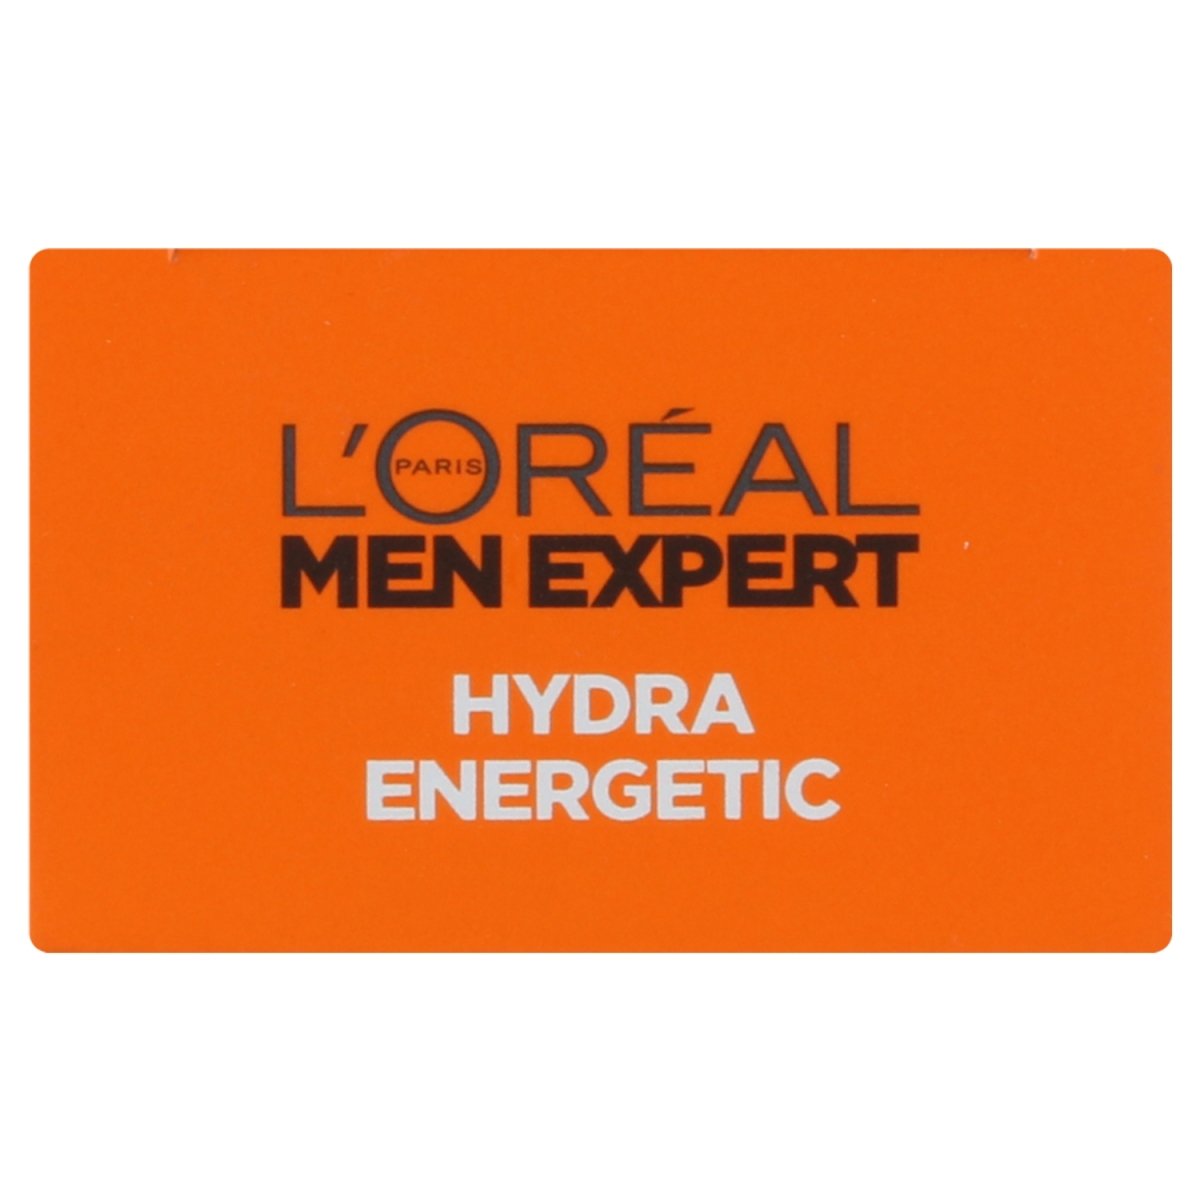 L'Oreal Men Expert Turbo Booster Eye Roll On - Intamarque 3600521667279